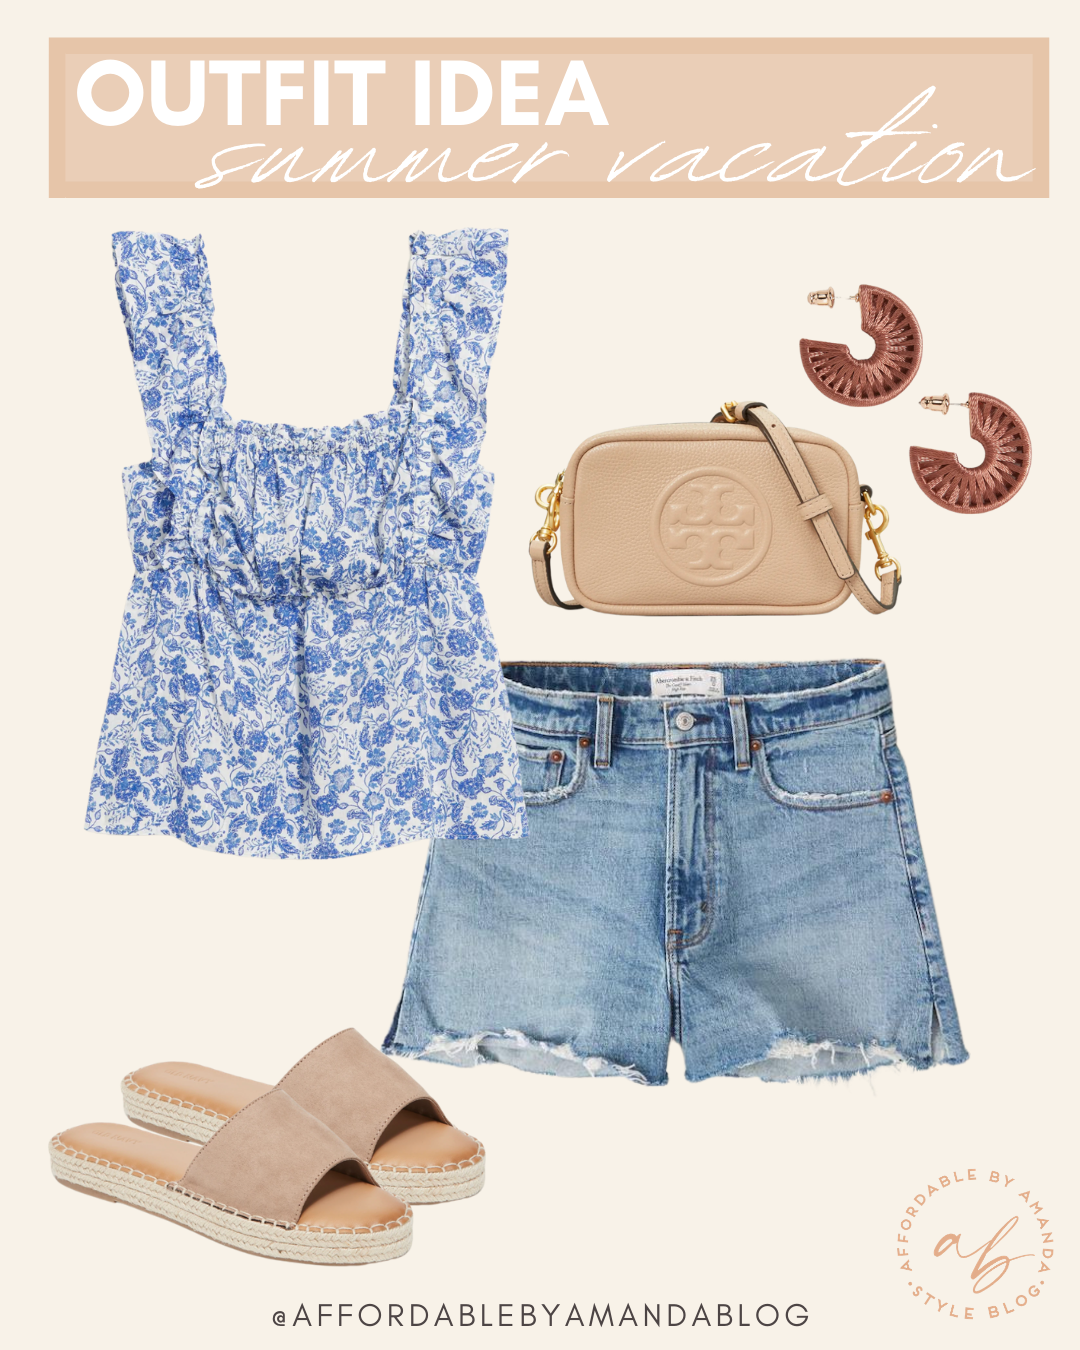 Printed Ruffle Babydoll Top for Women - Abercrombie & Fitch Mom Denim Shorts - Outfit Ideas for Summer 2021